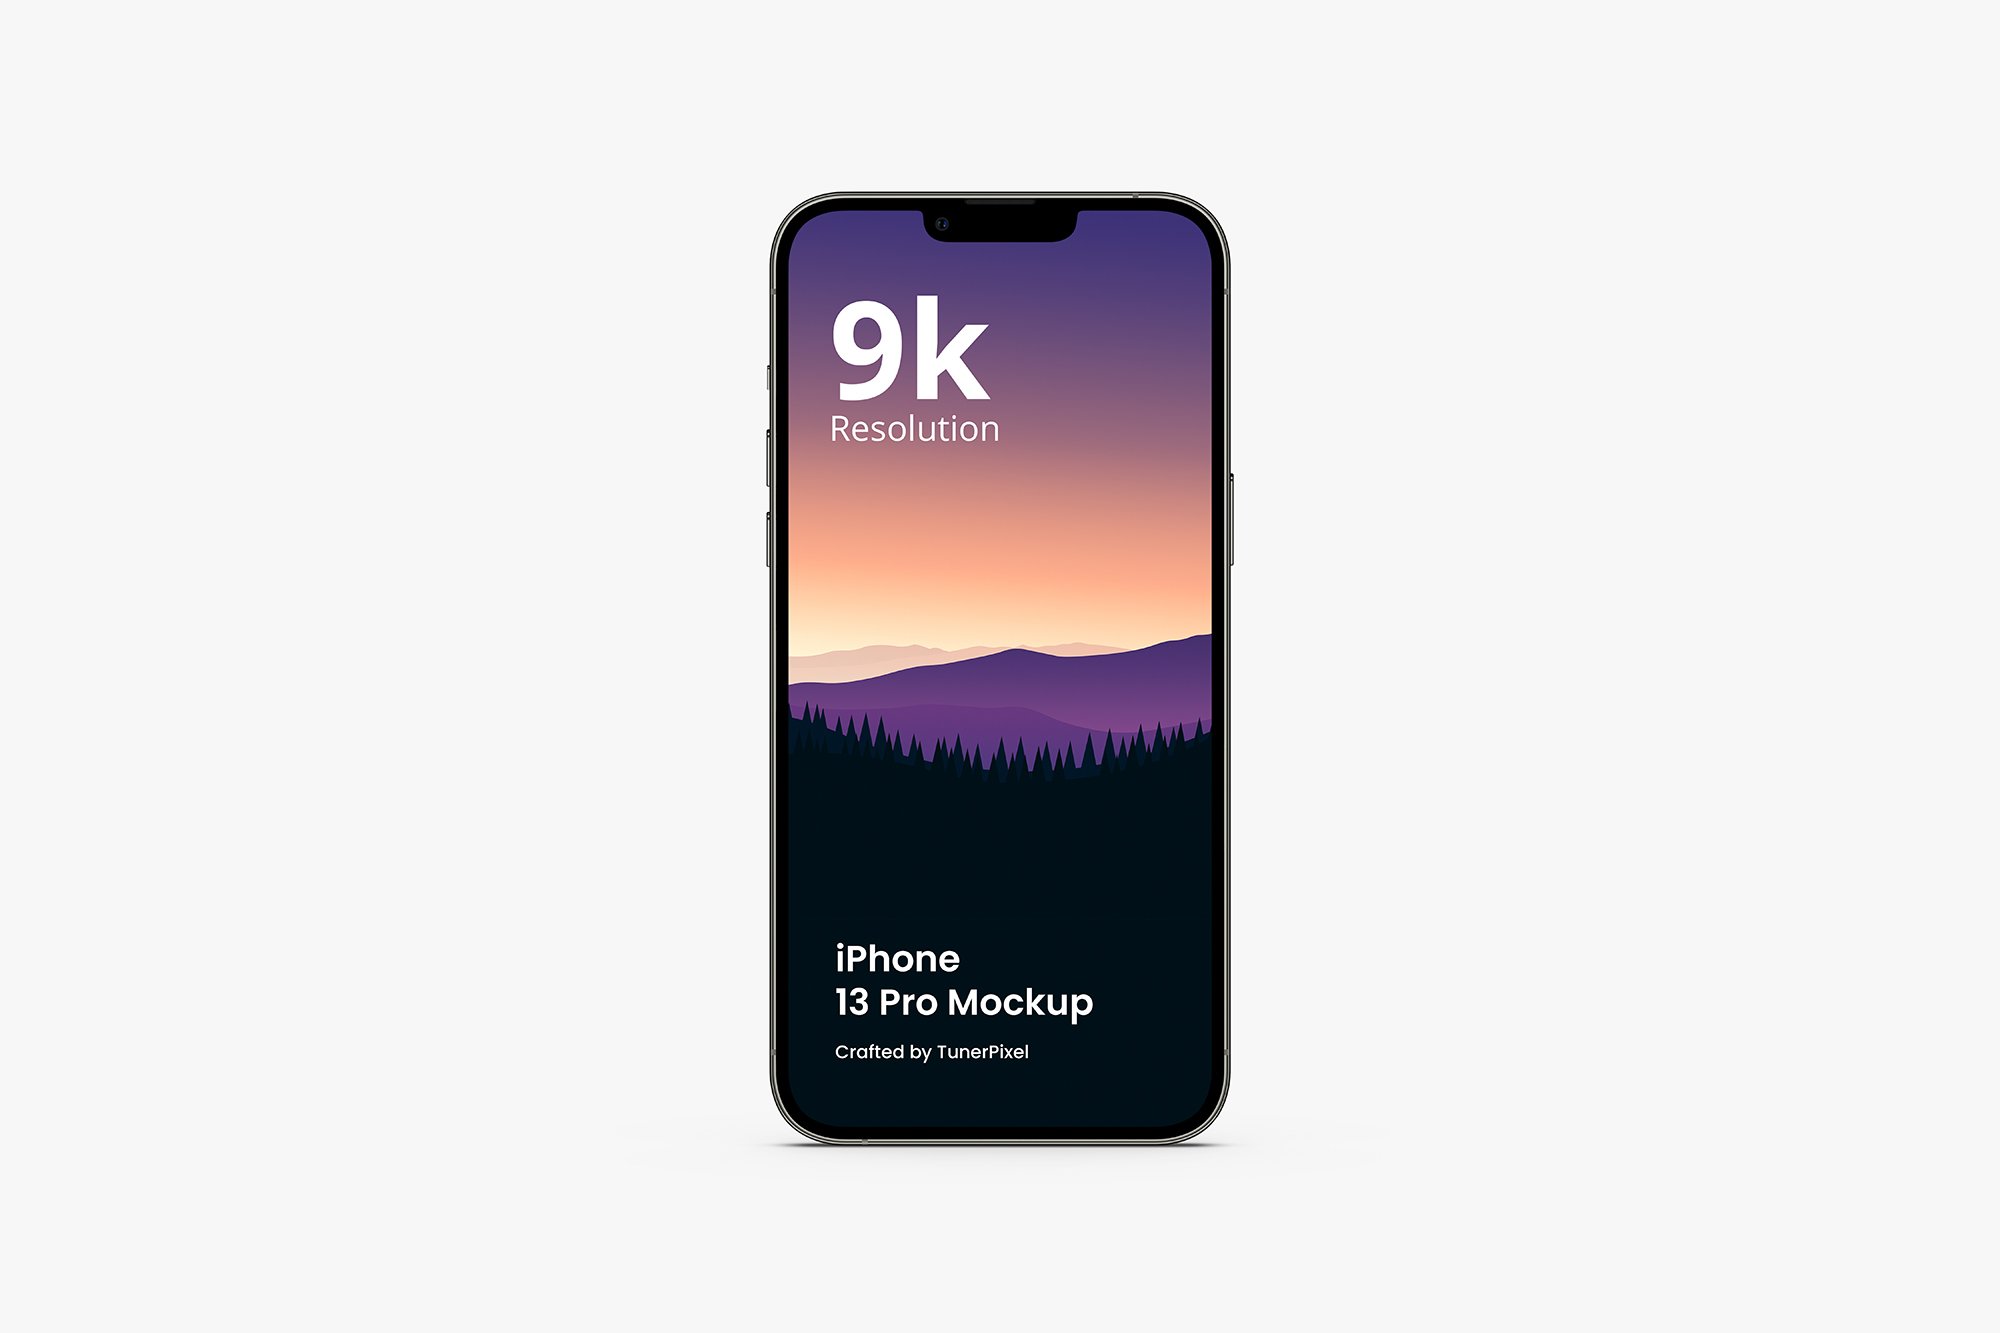 iPhone 13 Pro Mockup preview image.